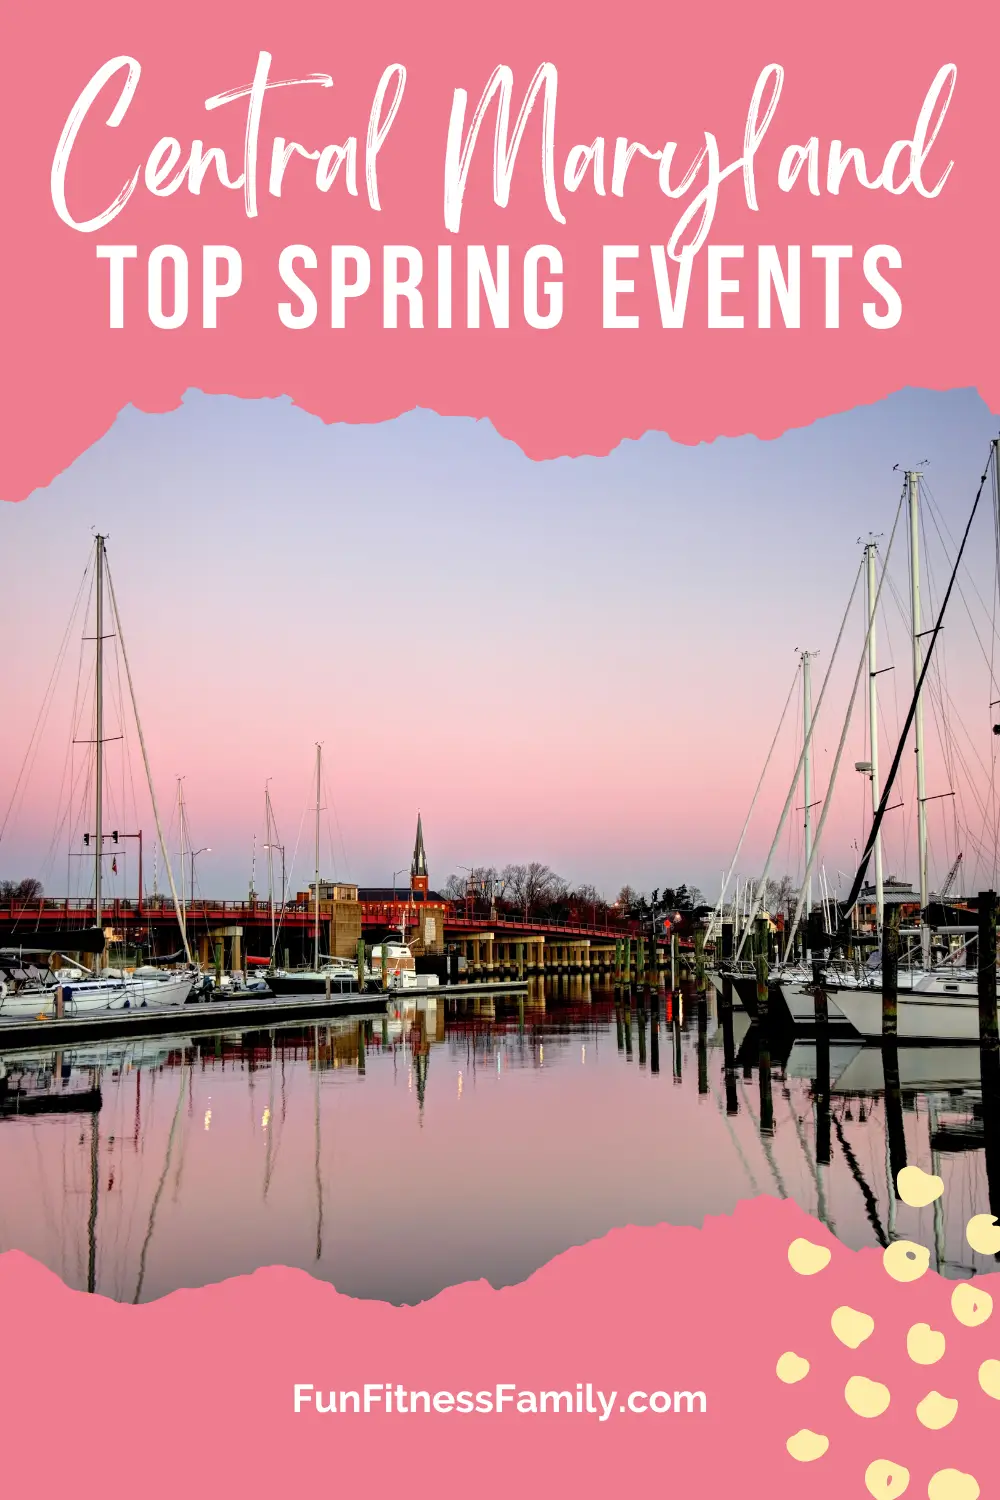 If you're looking for something fun to do this spring, look no further than Central Maryland! There are a ton of great festivals and events taking place in the next few months. From National Harbor's Cherry Blossom Festival to the various concerts happening throughout the region, there's something for everyone! #baltimore #nationalharbor #maryland #springevents